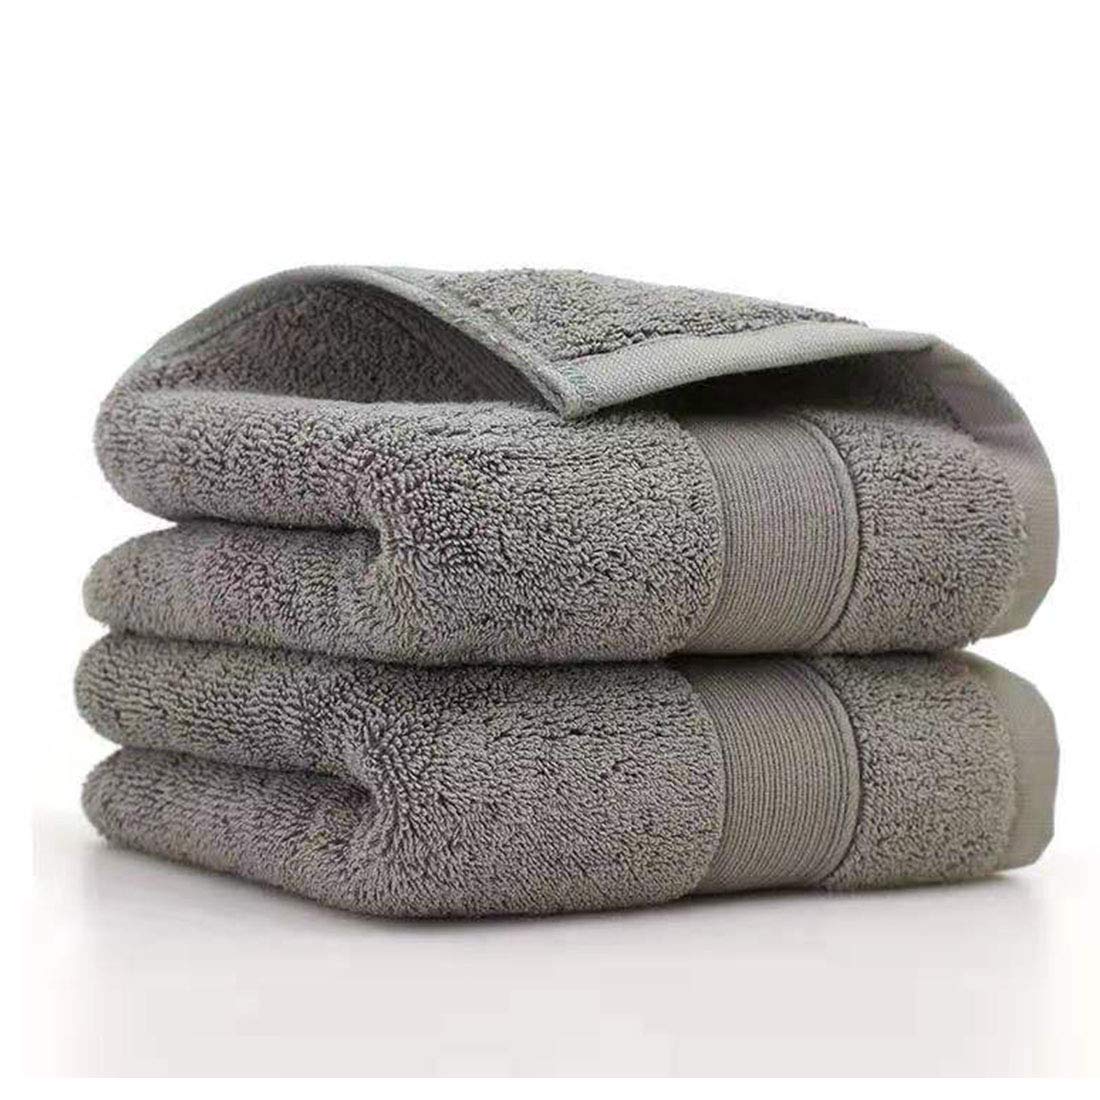 Clearance! Hand Towels for Bathroom , Cotton Bath Hand Towel , Face Towel  Soft Highly Absorbent Towels for Adults and Children for Bathroom Kitchen